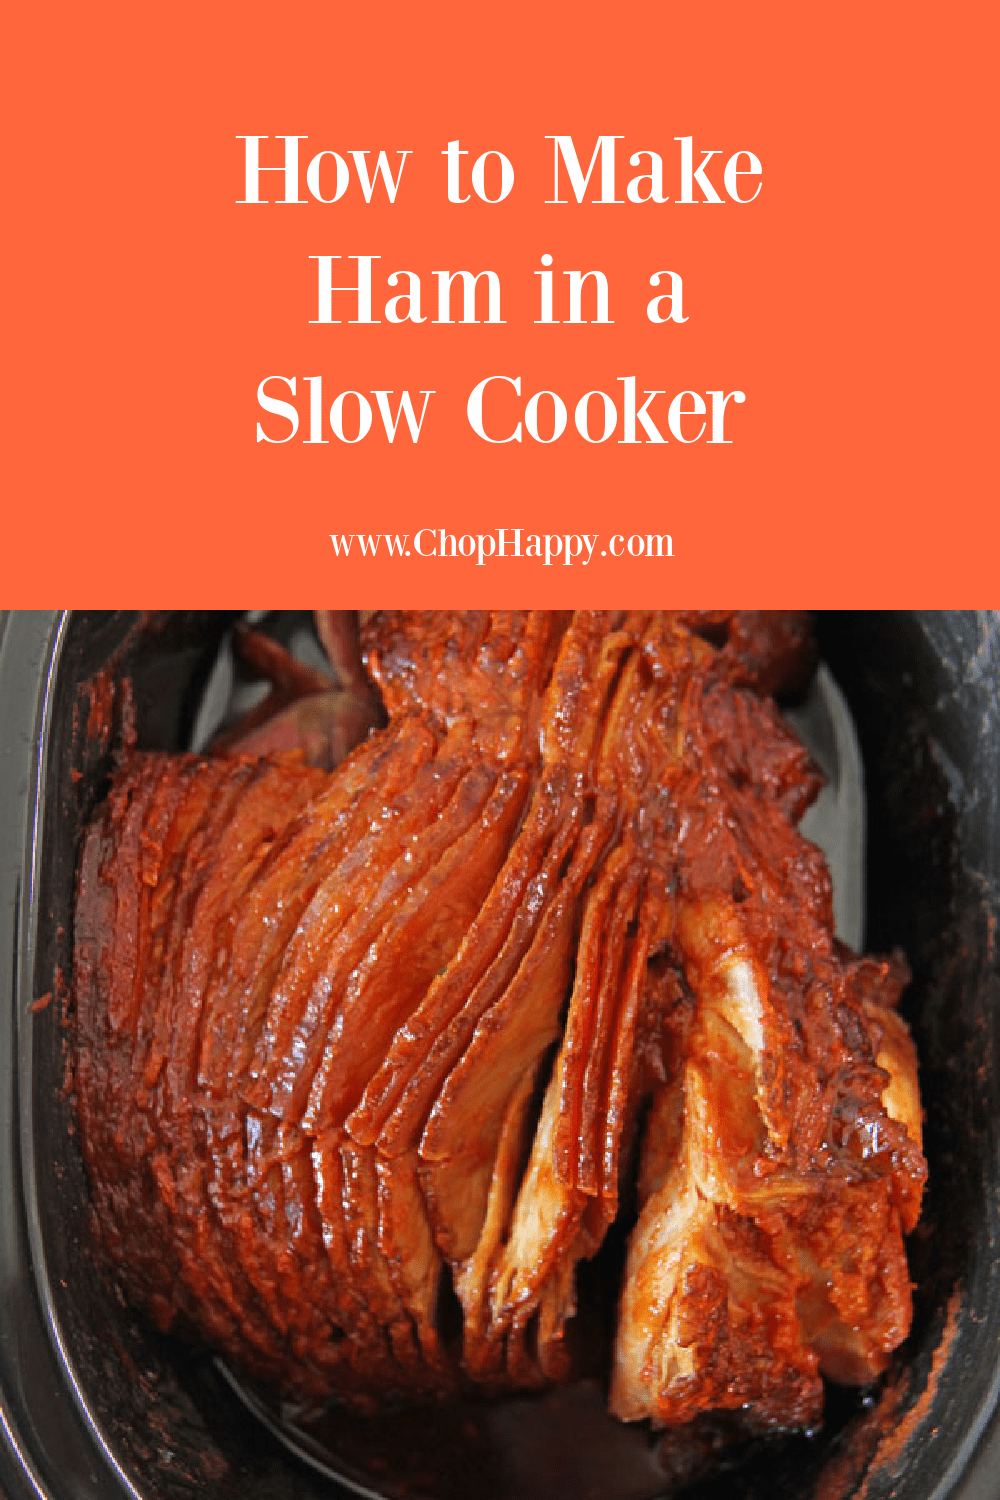 How To Make Ham in a Slow Cooker. With a serial ham, glaze, and slow cooker dinner is easy. I use honey and spicy sauce to glaze the ham for the holidays, Christmas dinner, Easter, or weeknight dinner. Happy Slow Cooker Cooking! #hamrecipes #slowcookerrecipes